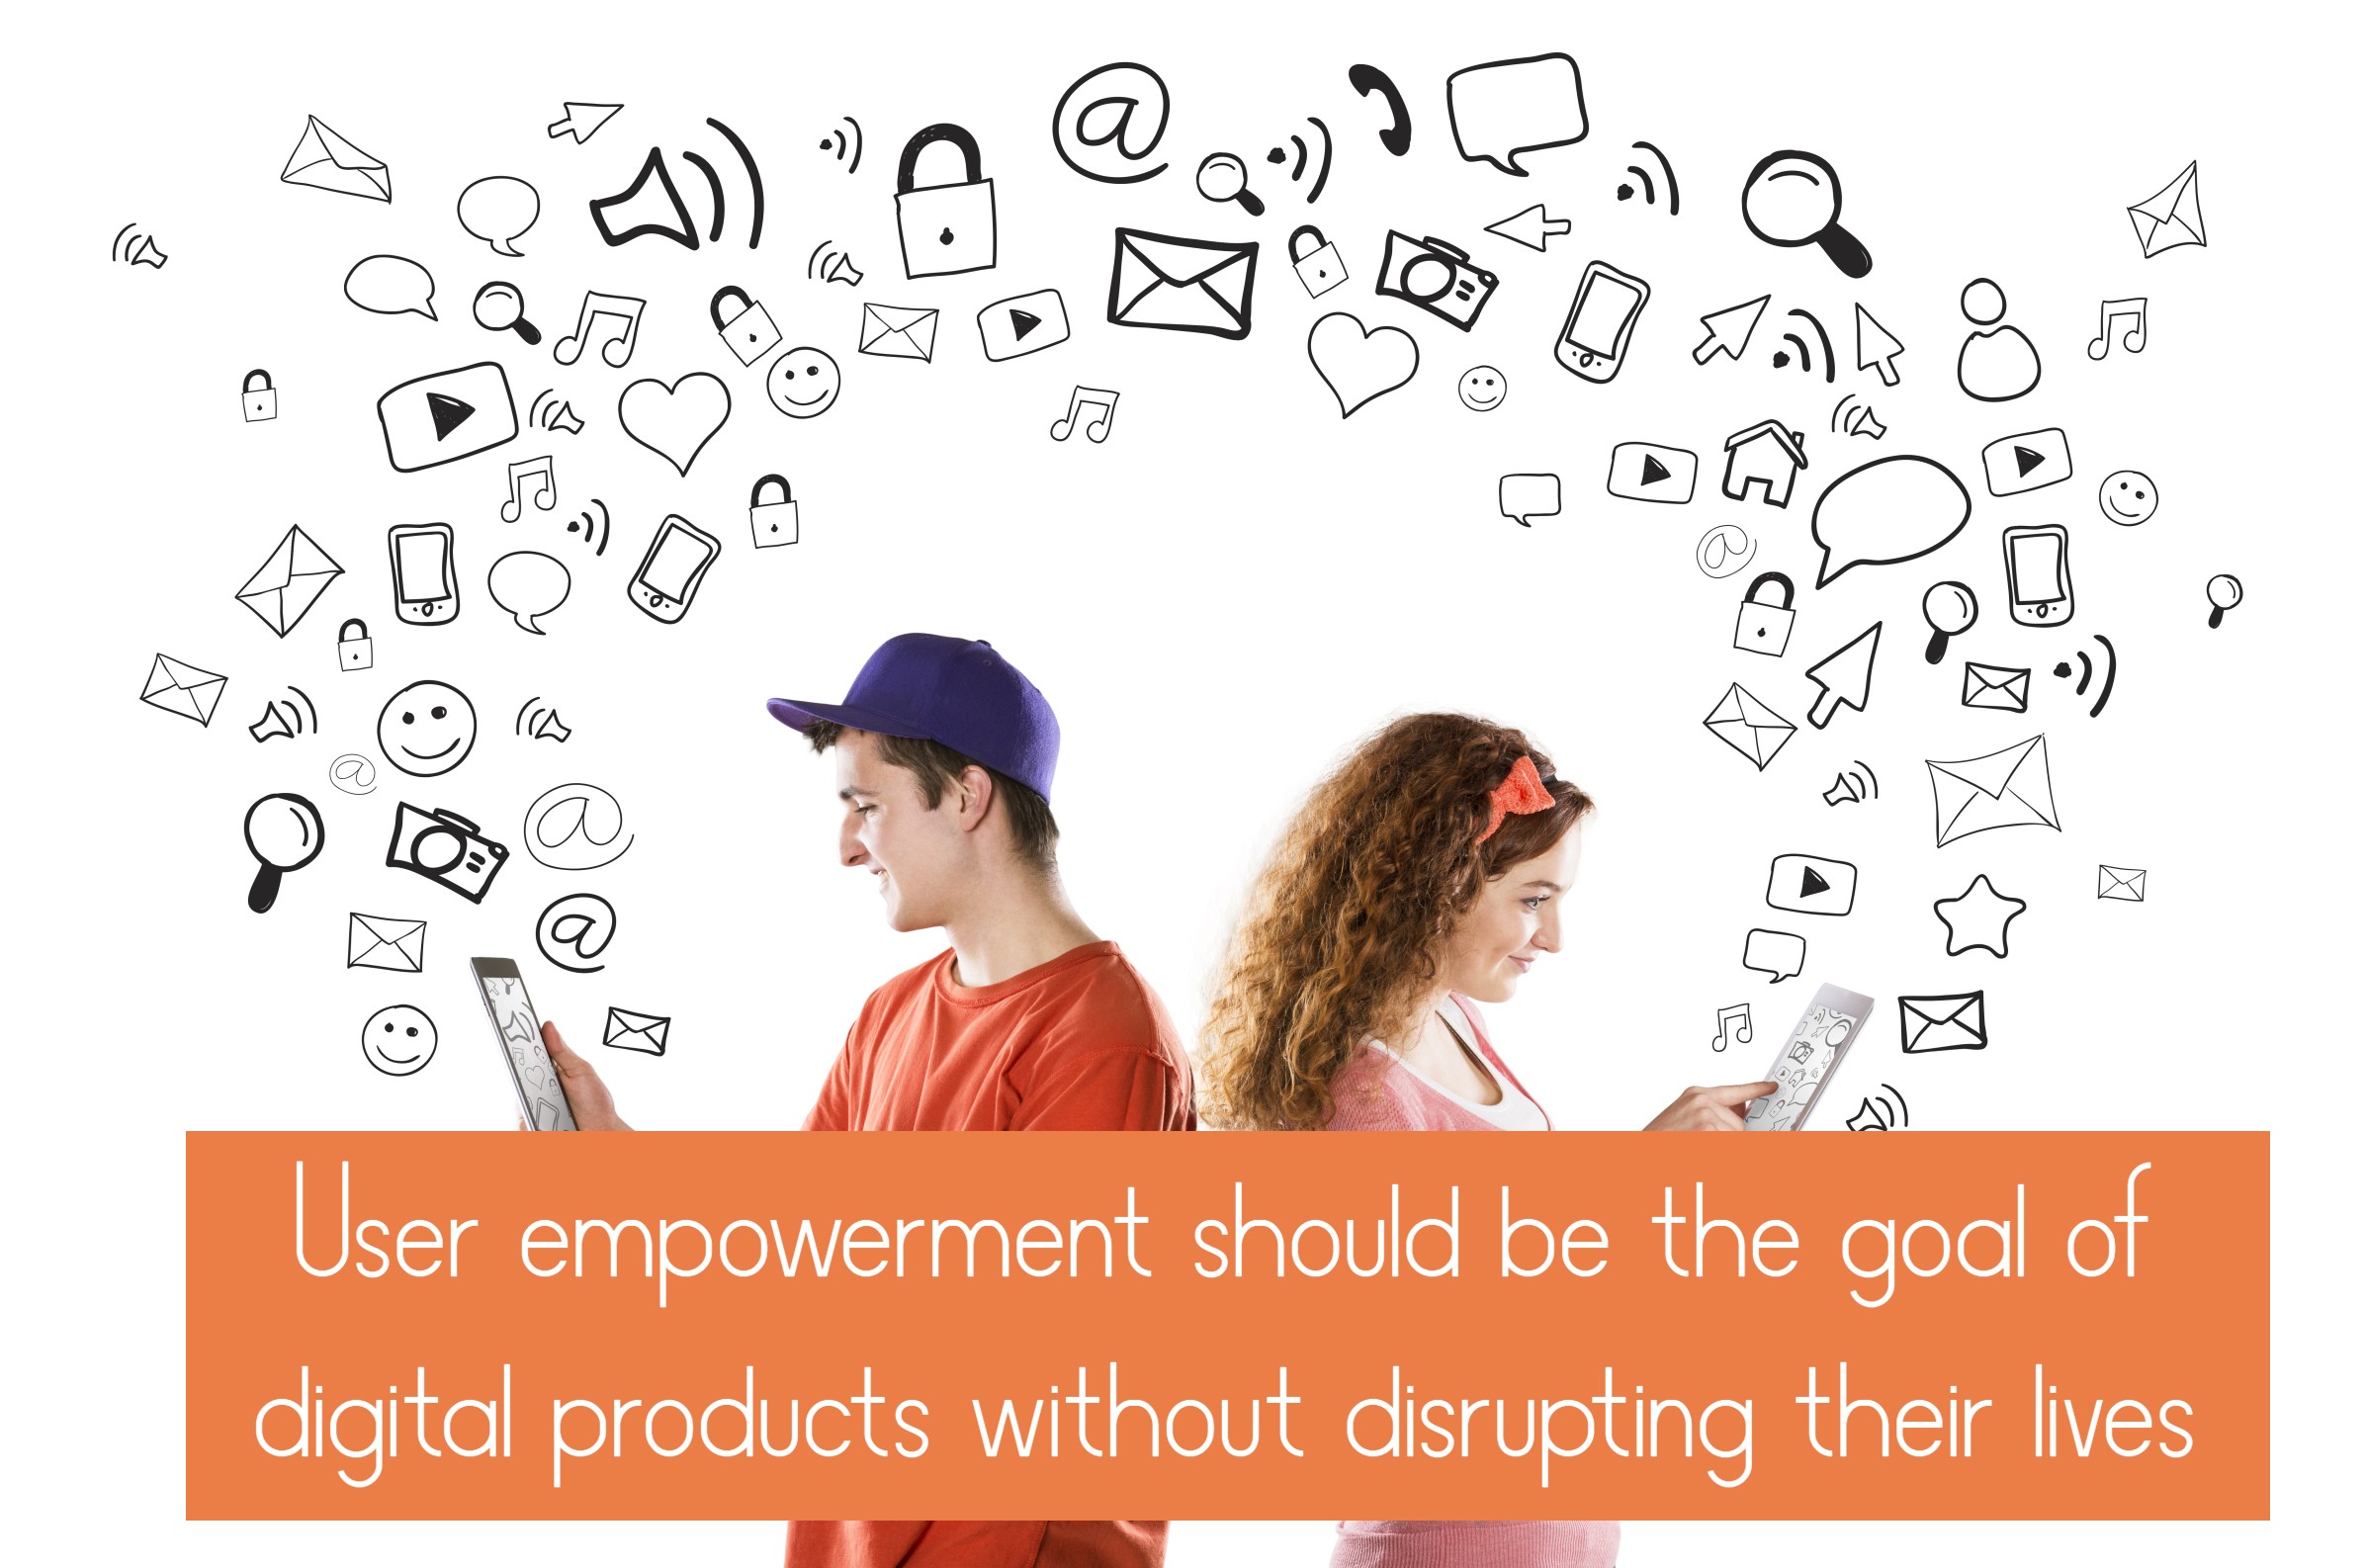 User empowerment should be the goal of digital products